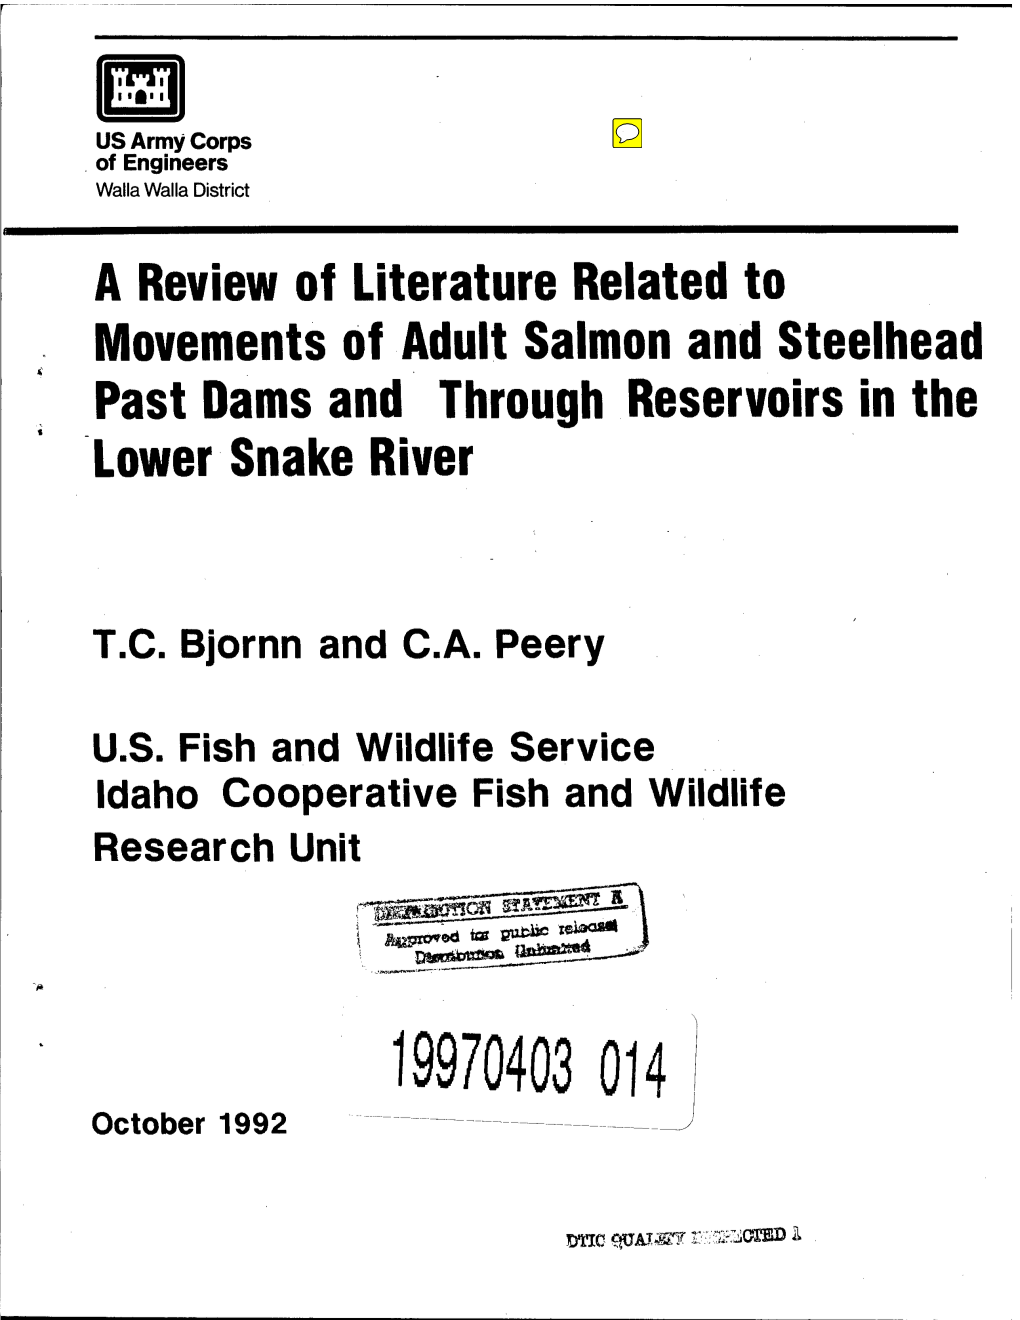 A Review of Literature Related to Movements of Adult Salmon and Steelhead Past Dams and Through Reservoirs in the Lower Snake River